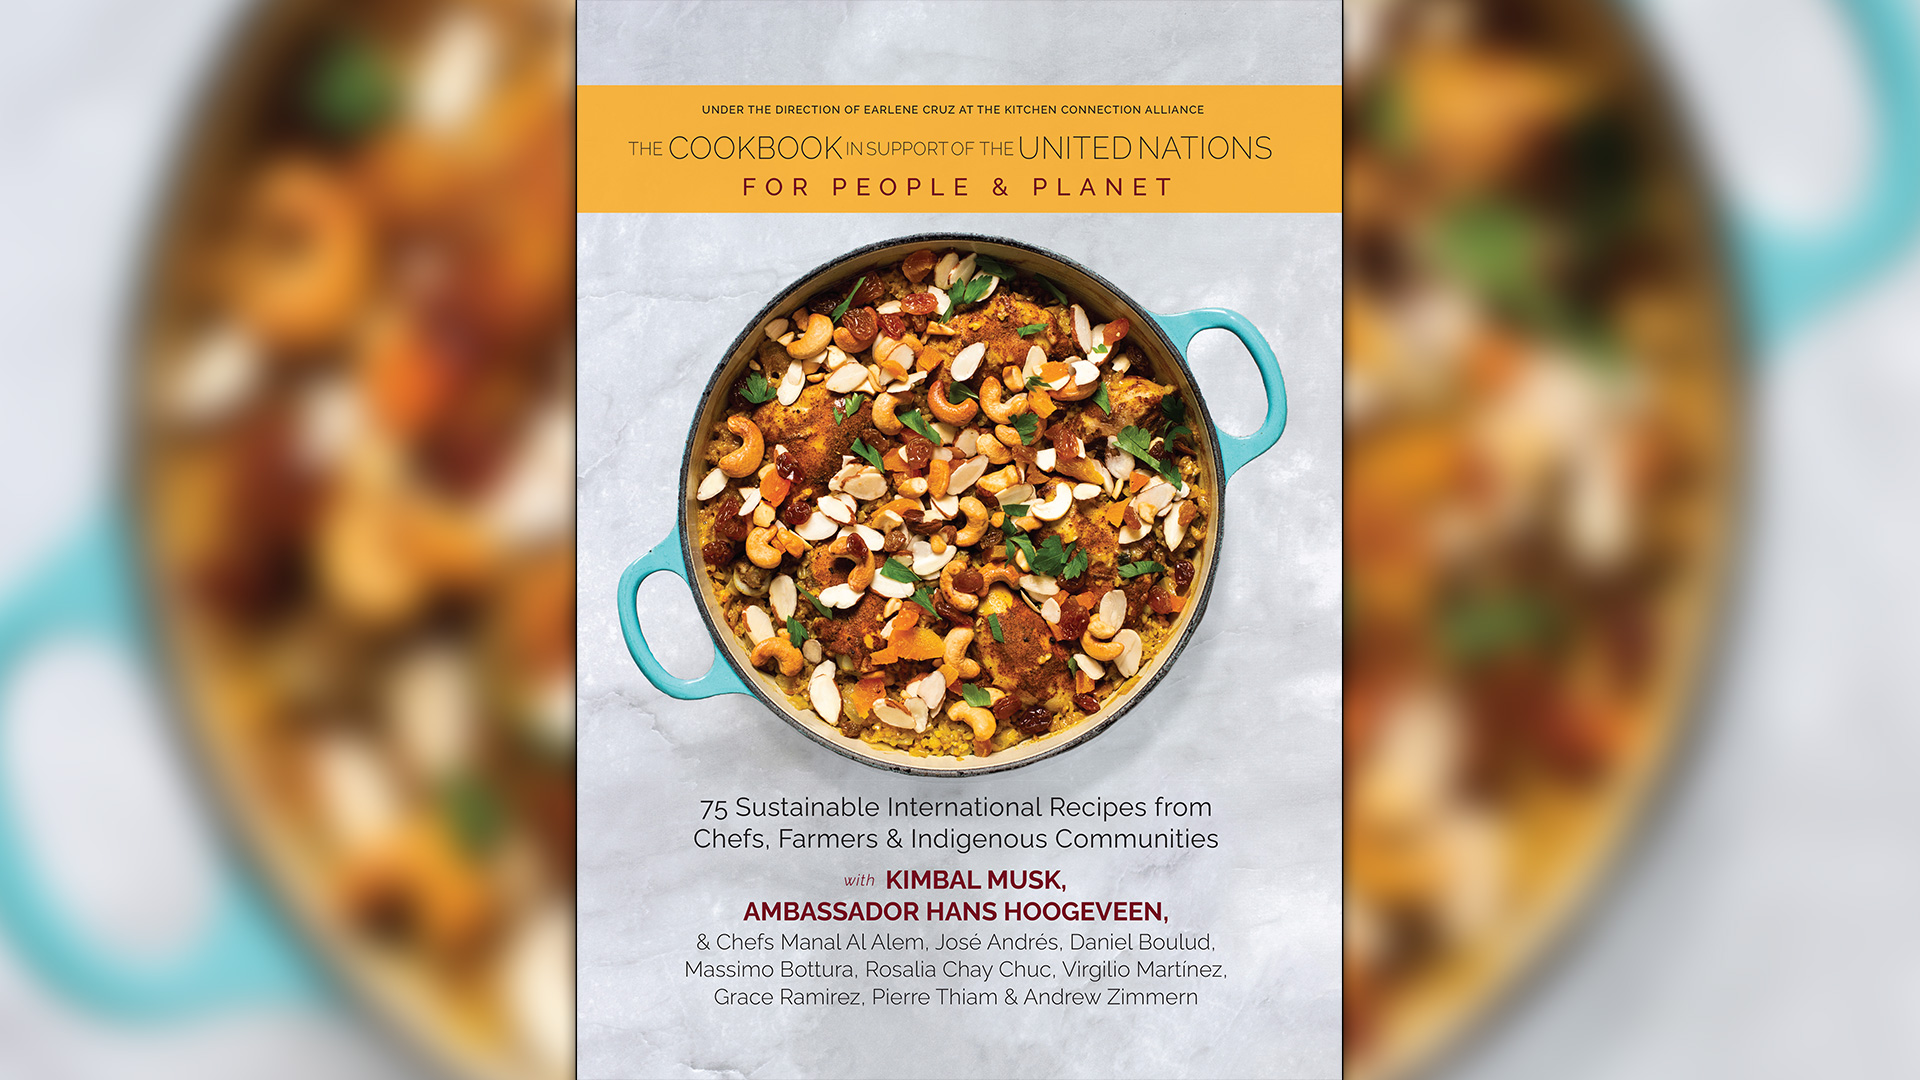 cover of "Cookbook in support of the United Nations: for people and the planet" (A Cookbook in Support of the United Nations: For People and Planet).